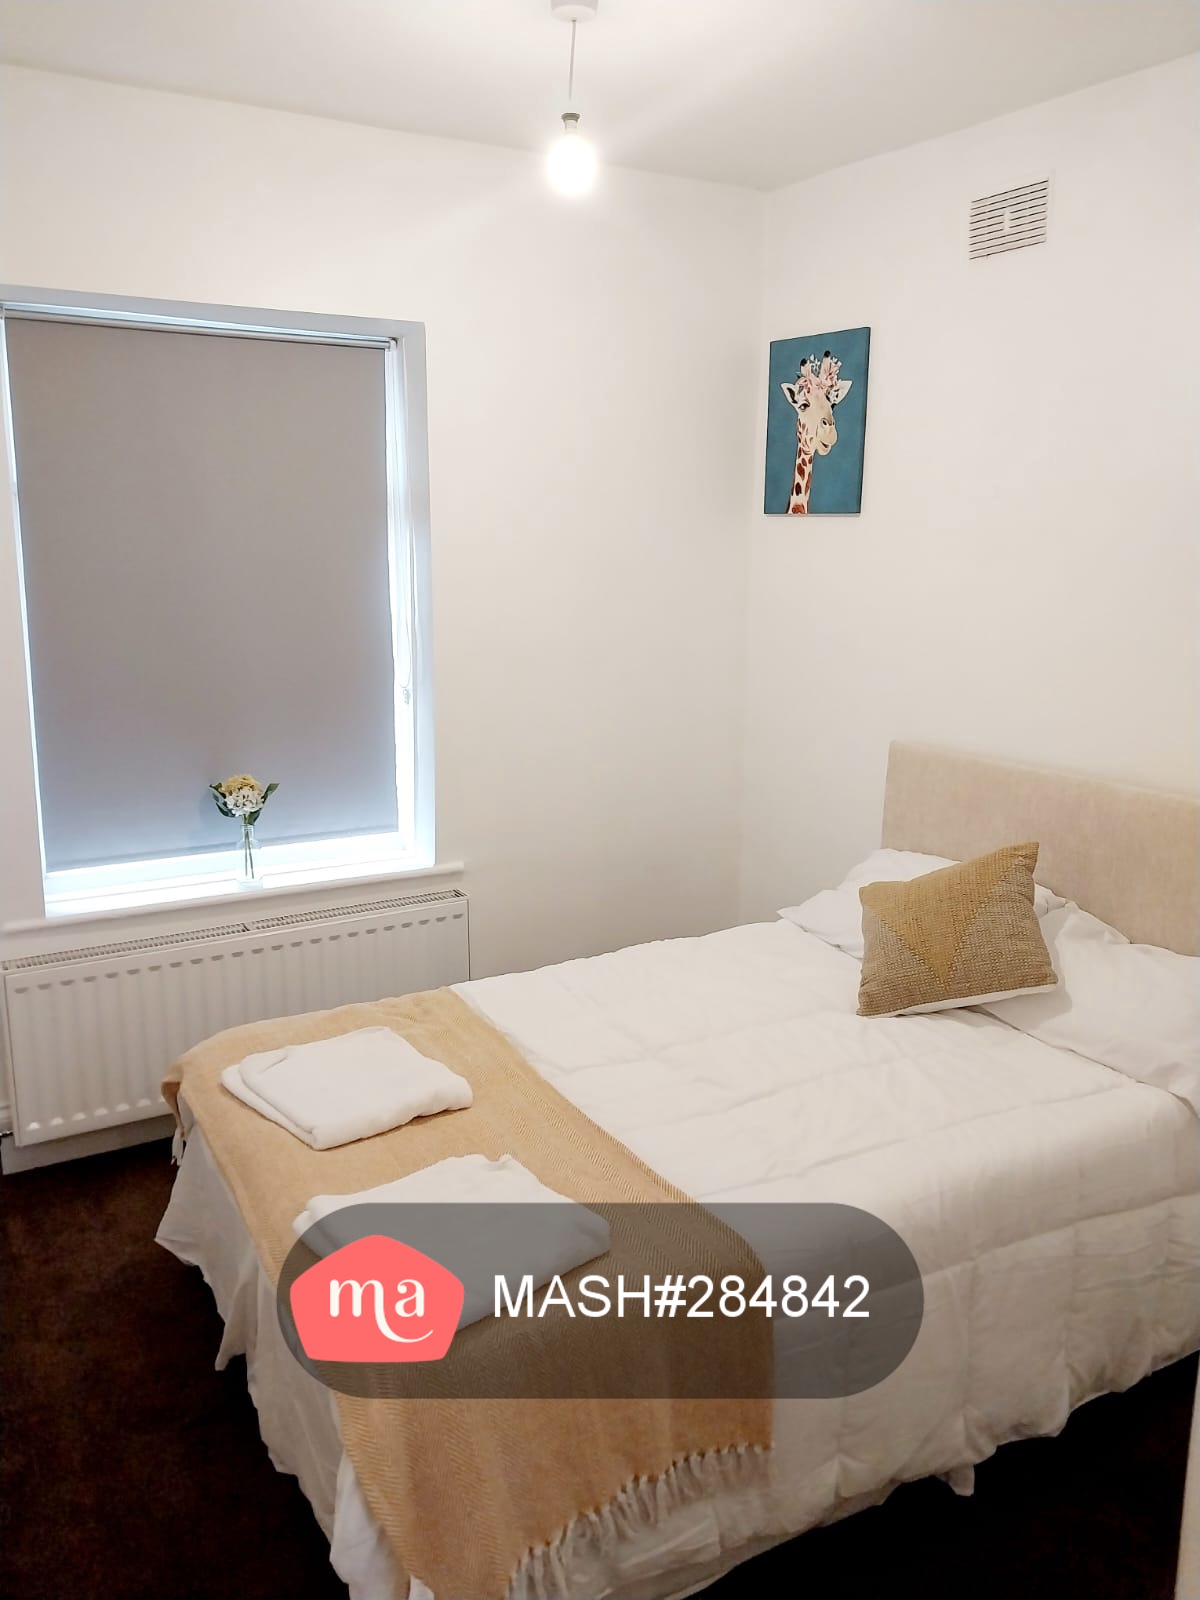 2 Bedroom Semi-detached to rent in Newcastle upon tyne - Mashroom